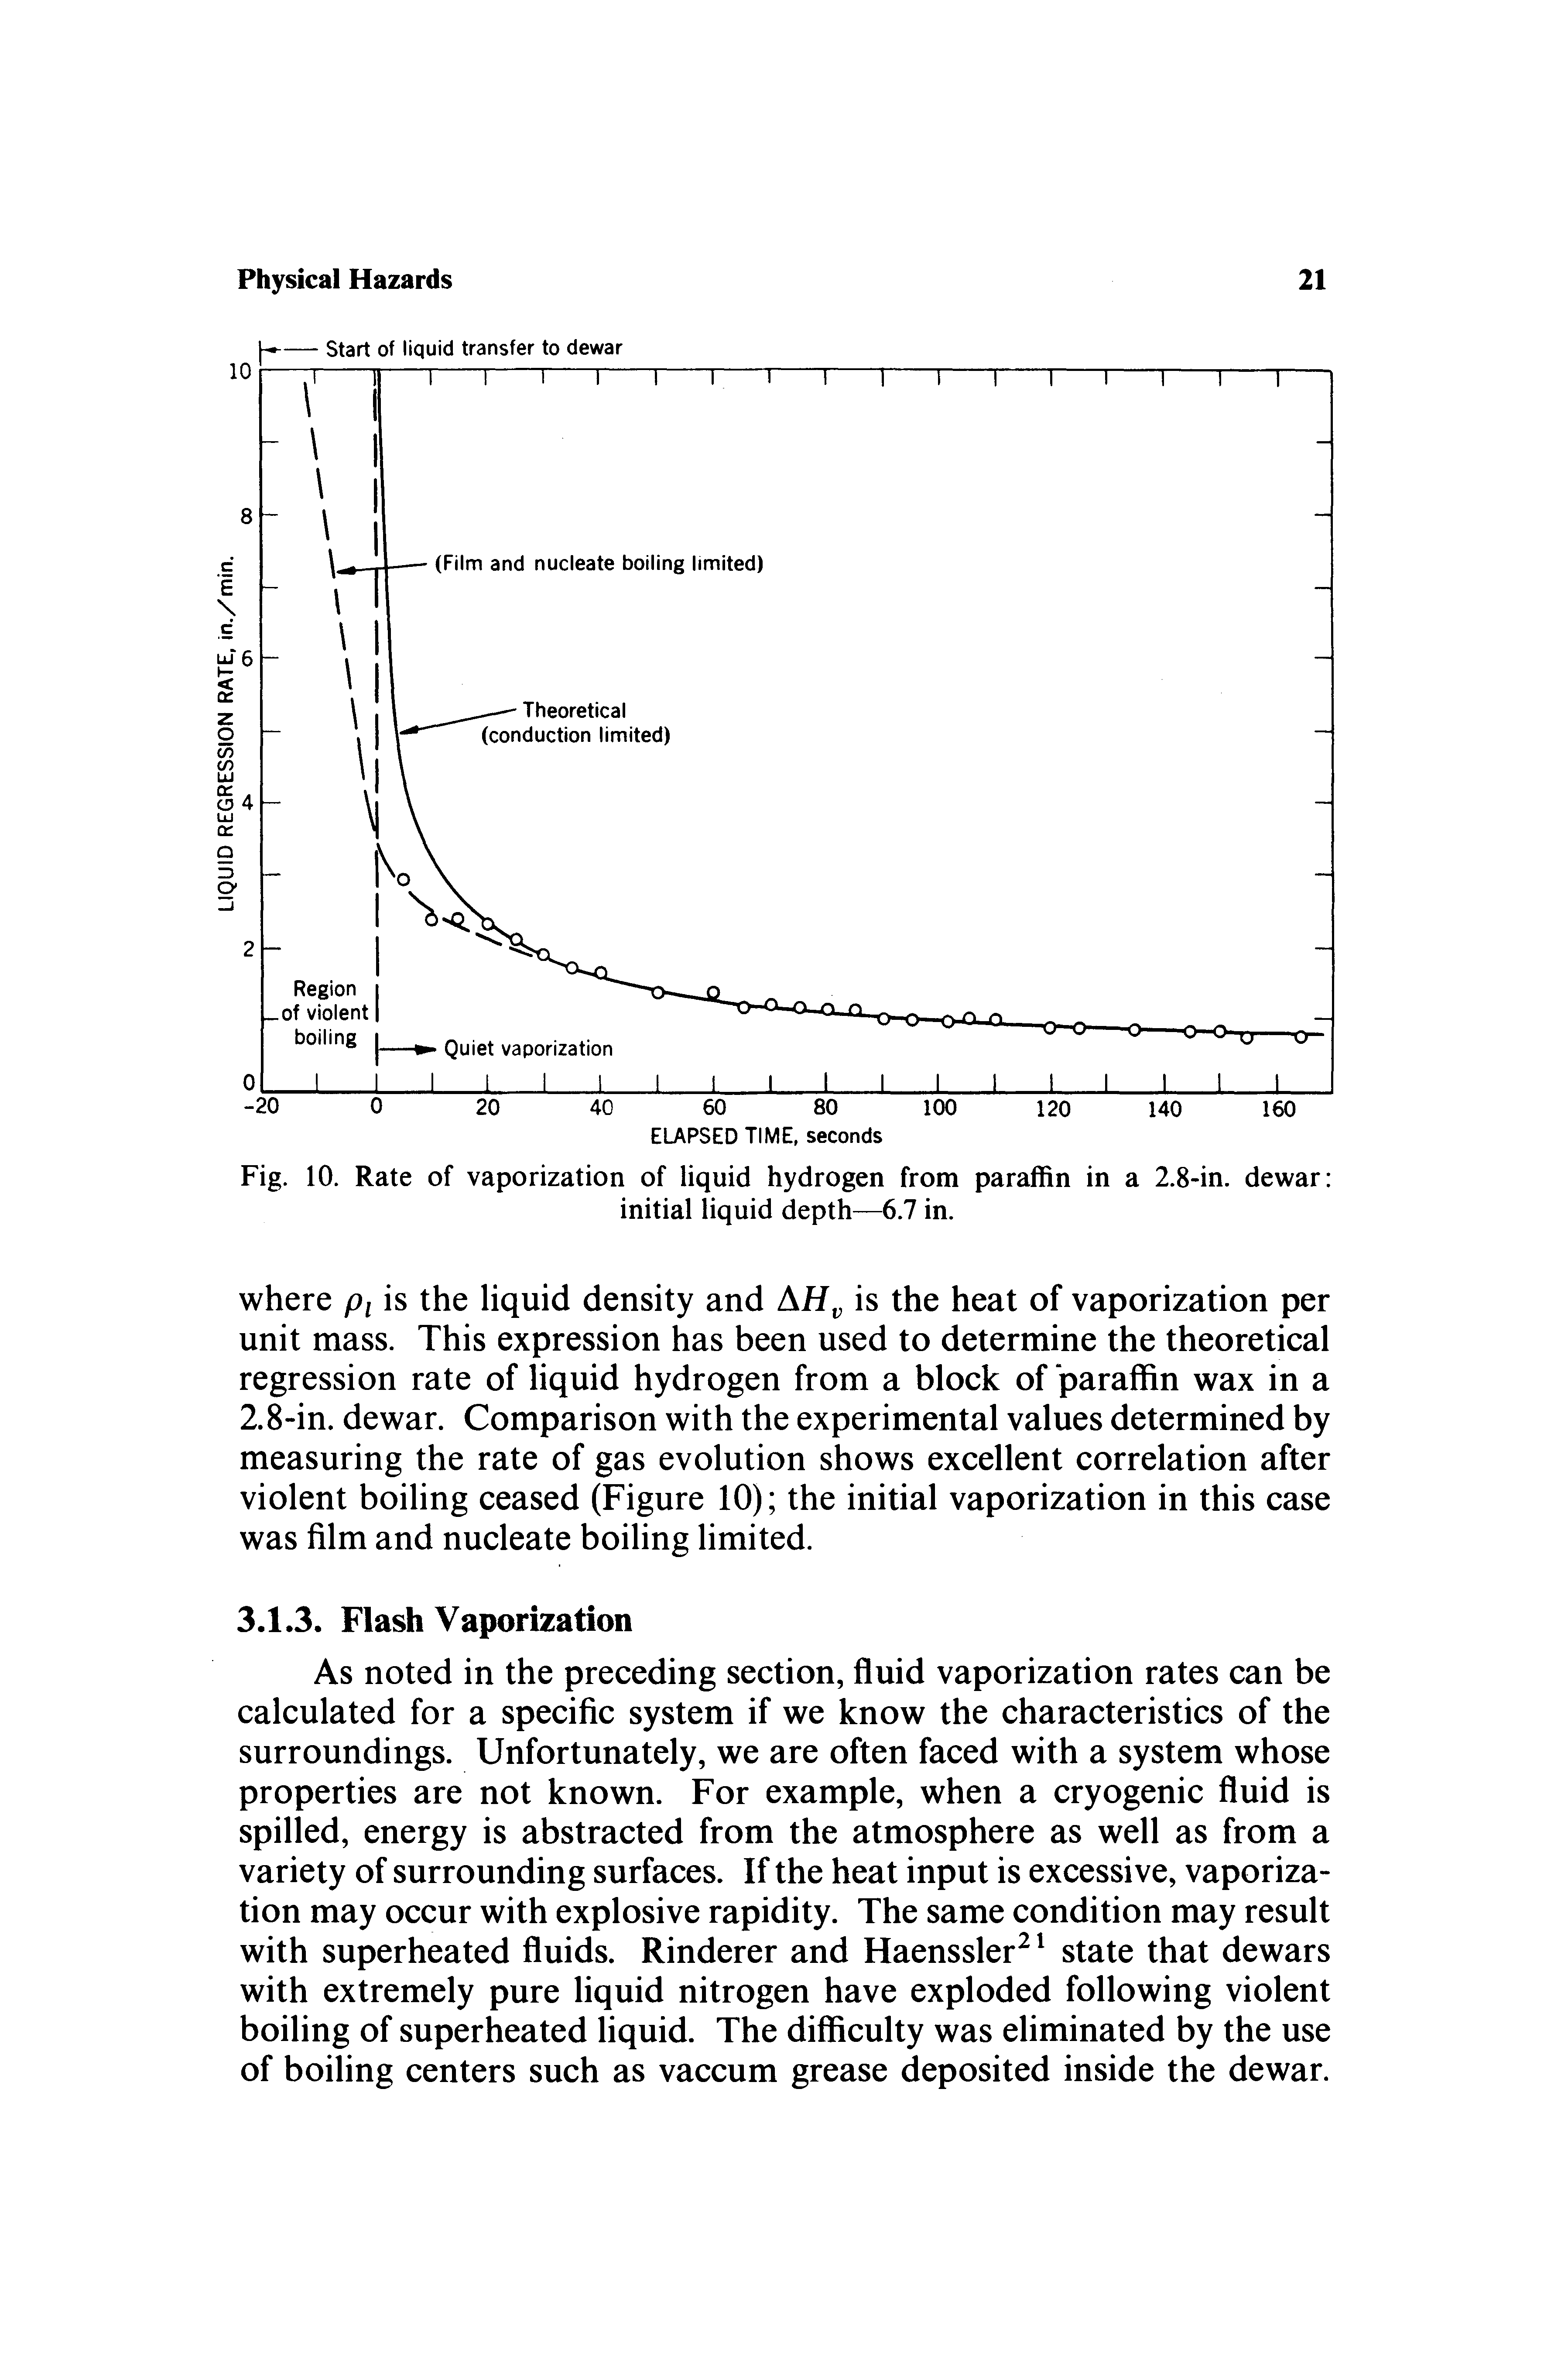 Fig. 10. Rate of vaporization of liquid hydrogen from paraffin in a 2.8-in. dewar initial liquid depth—6.7 in.